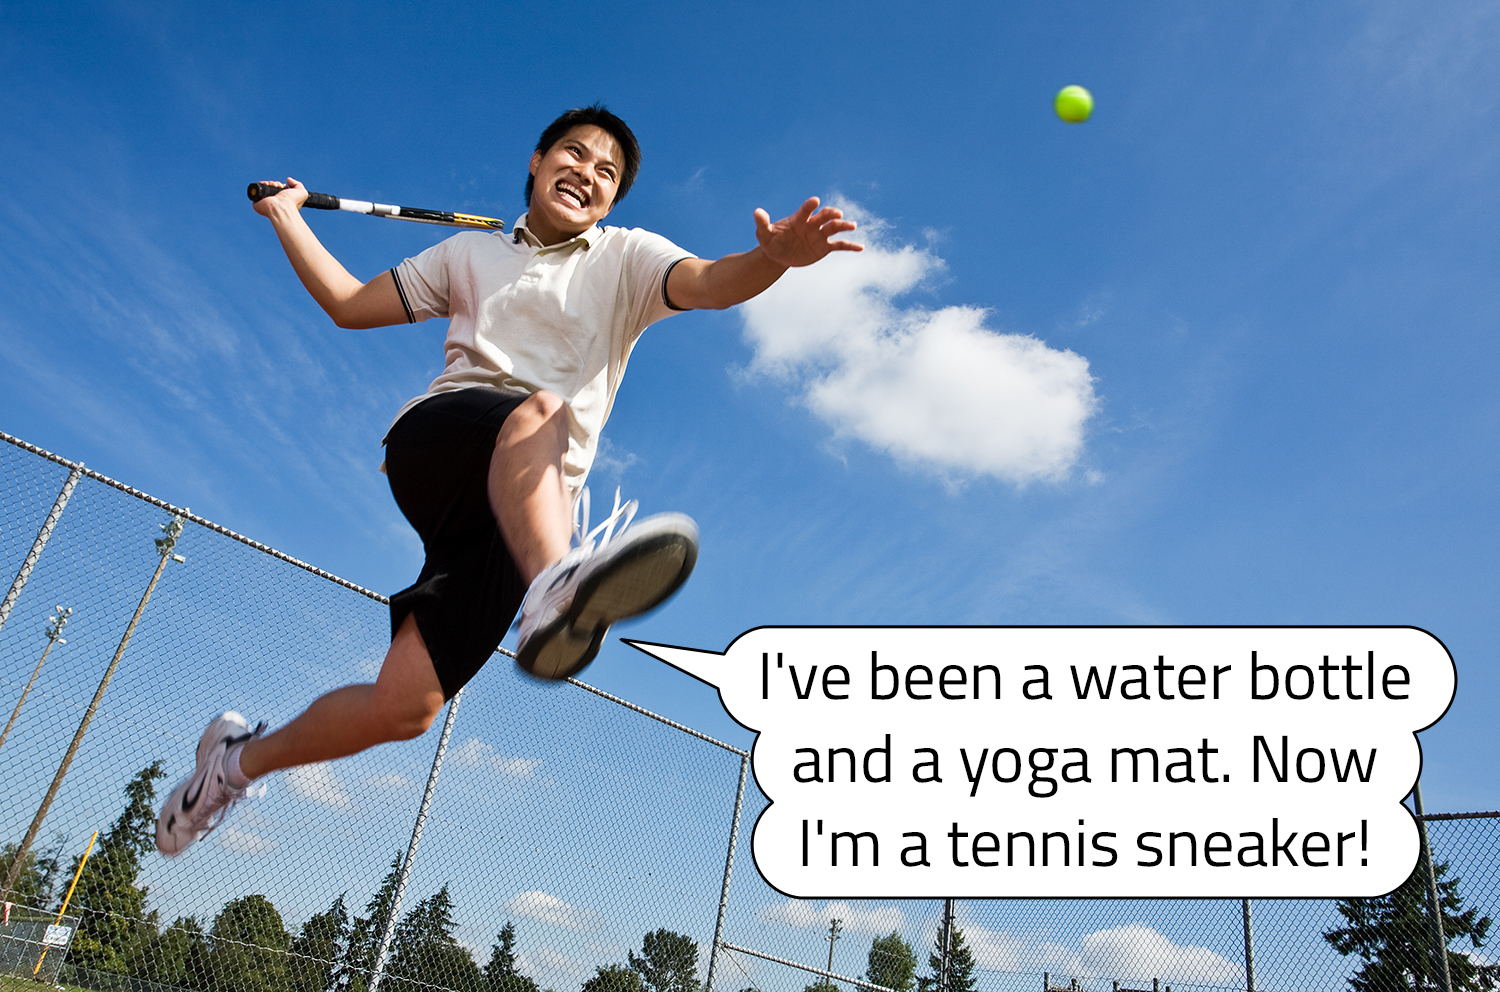 A man plays tennis as his sneaker says it has been a water bottle and yoga mat and is now a sneaker.